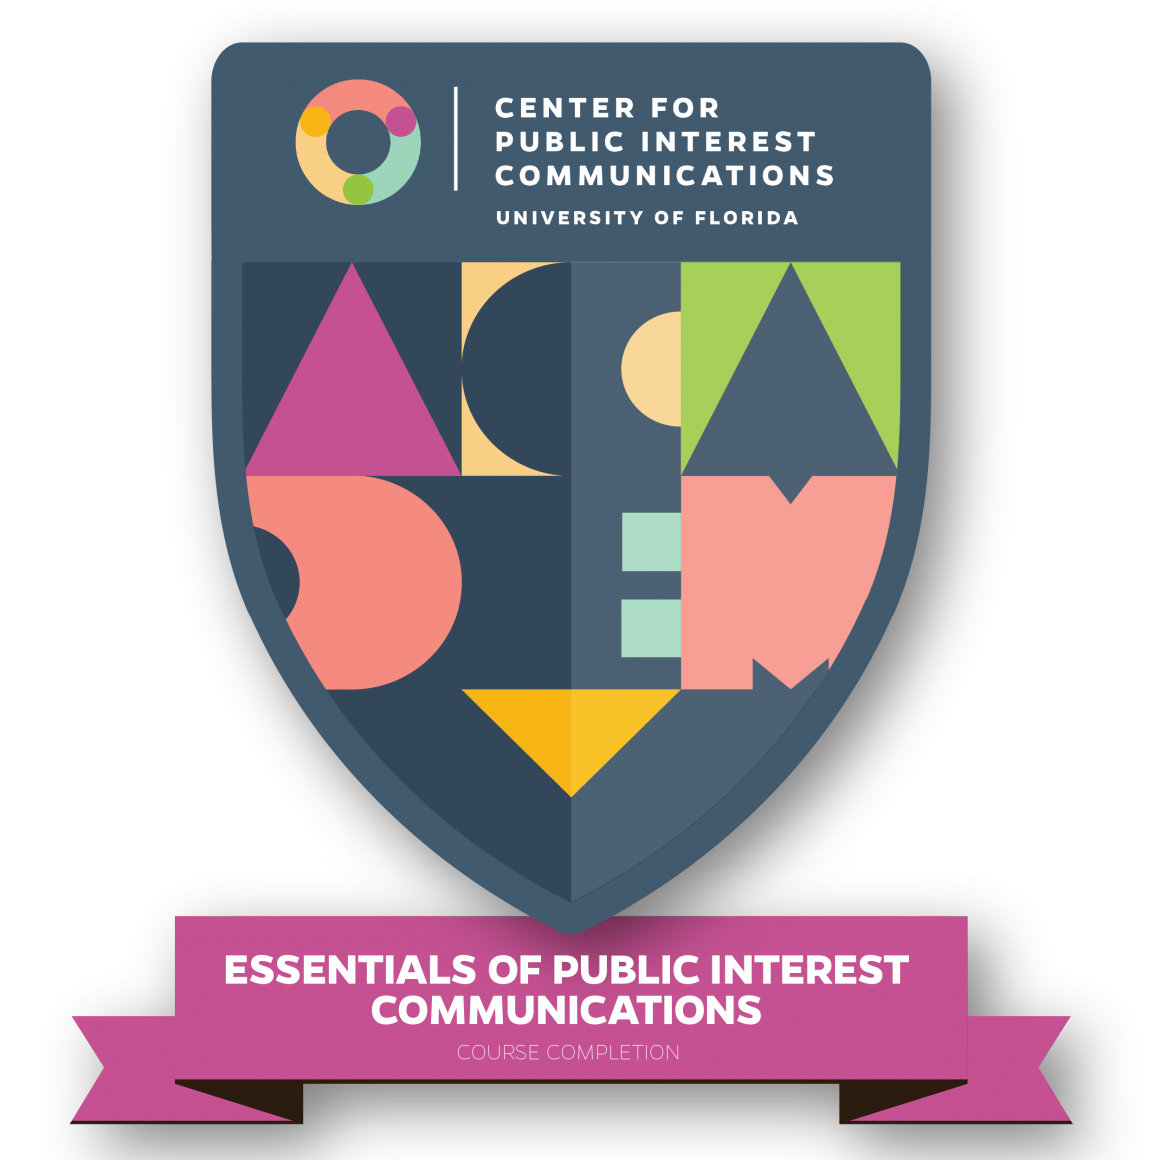 Picture of the digital badge as part of the credential earned for completing "Essentials of Public Interest Communications".